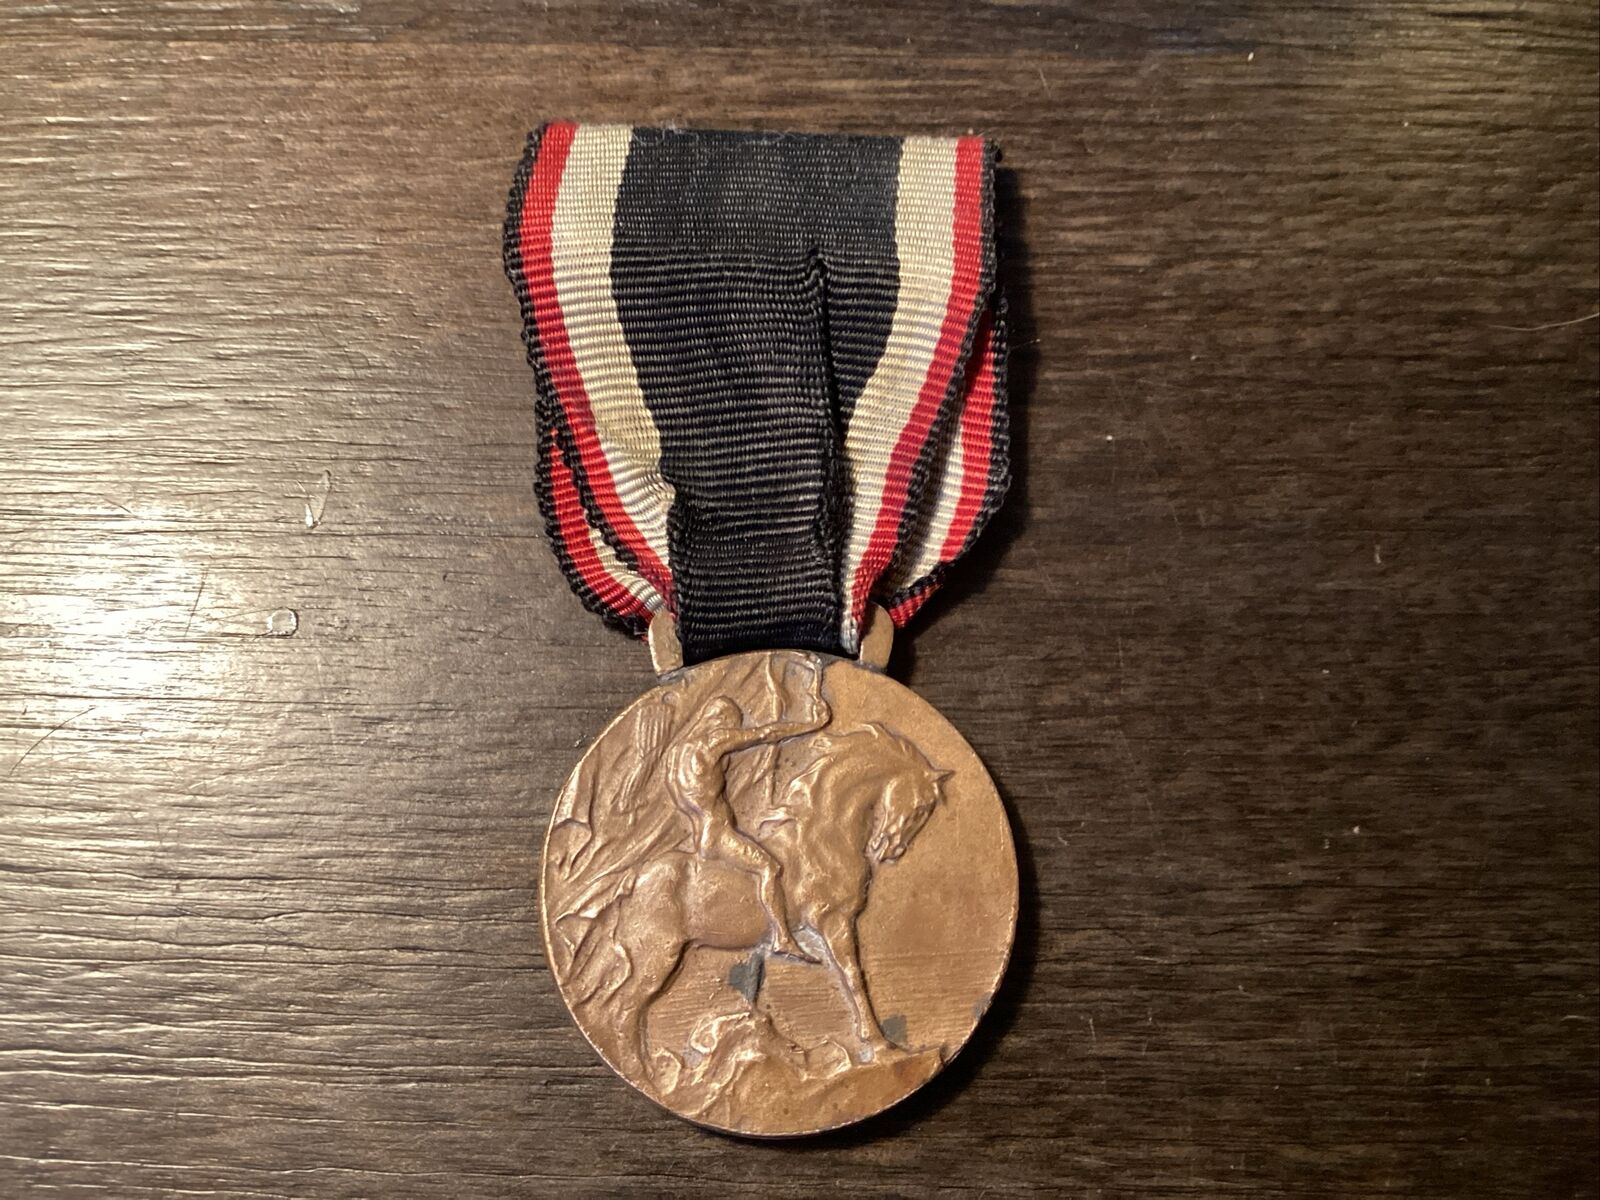 VINTAGE MEDAL FASCIST CAMPAIGN 1919-1922 FOR ITALY NOW AND ALWAYS